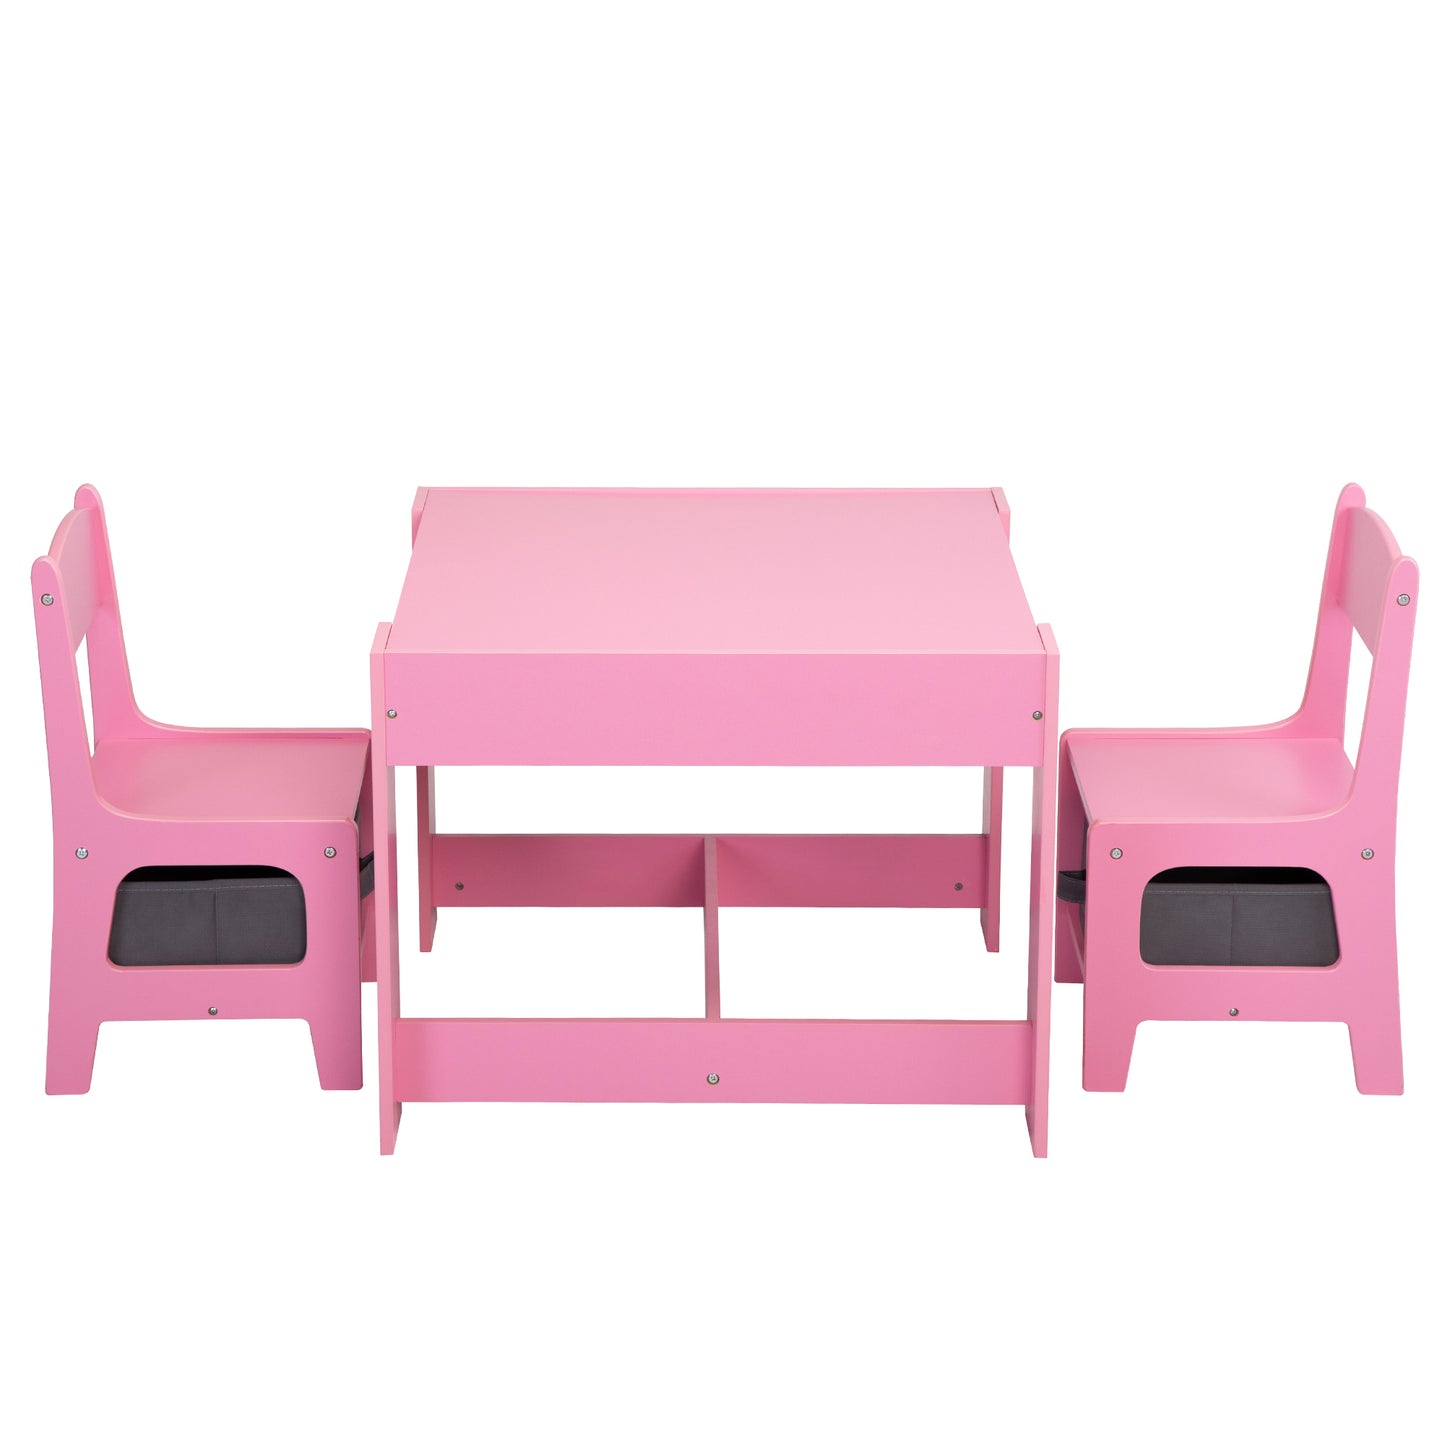 3-in-1 Kids Wood Table and 2 Chairs, Children Activity Table Set with Storage, Blackboard, Double-Sided Table for Drawing,Pink & Gray